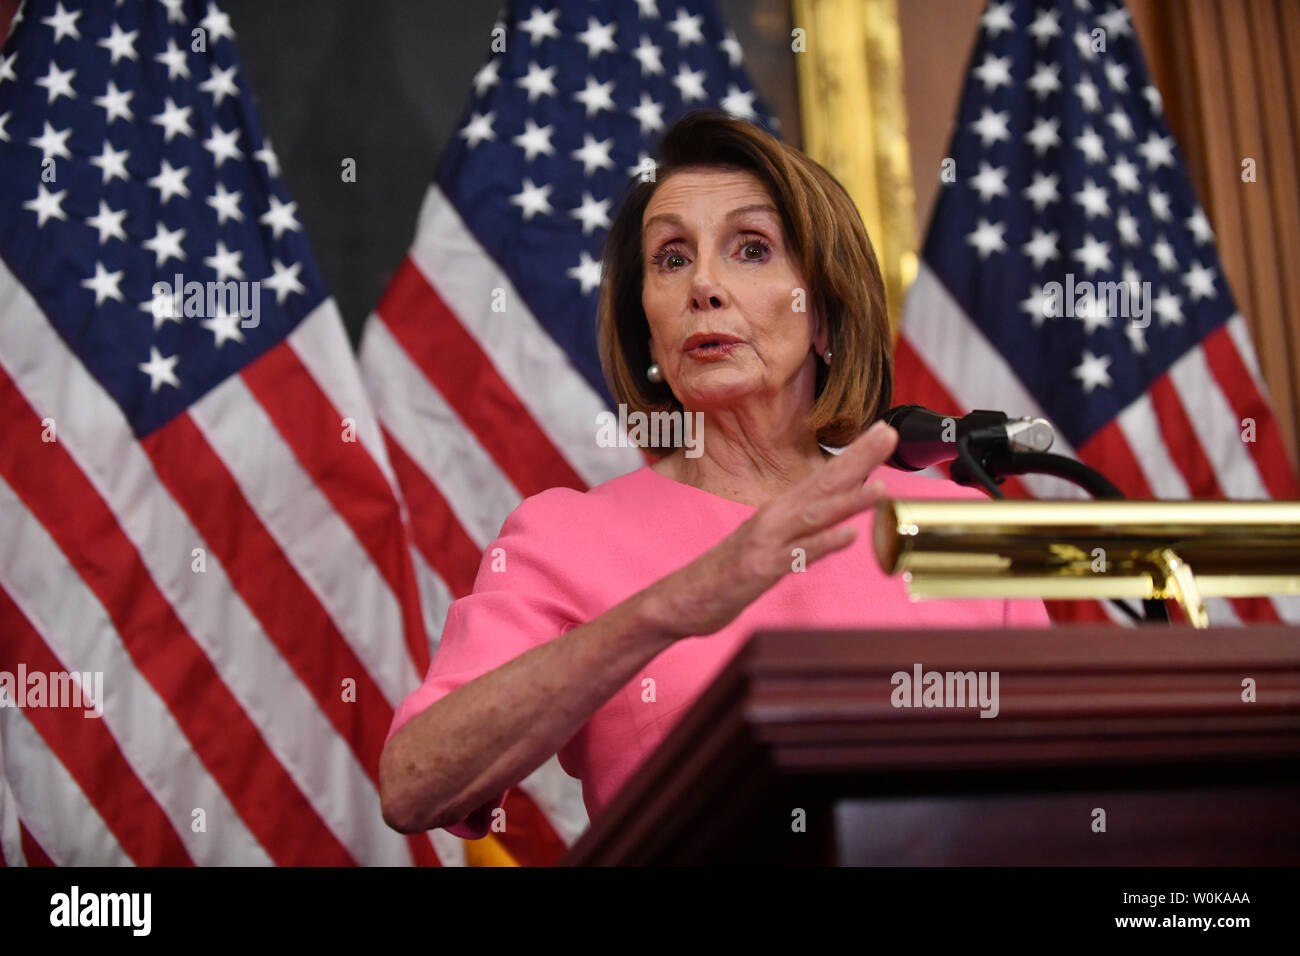 Representative Nancy Pelosi makes a statement at a press conference the day after midterm elections in the U.S. Capitol in Washington, DC on November 7, 2018. Democrats captured a majority in the House of Representatives.     Photo by Pat Benic/UPI Stock Photo